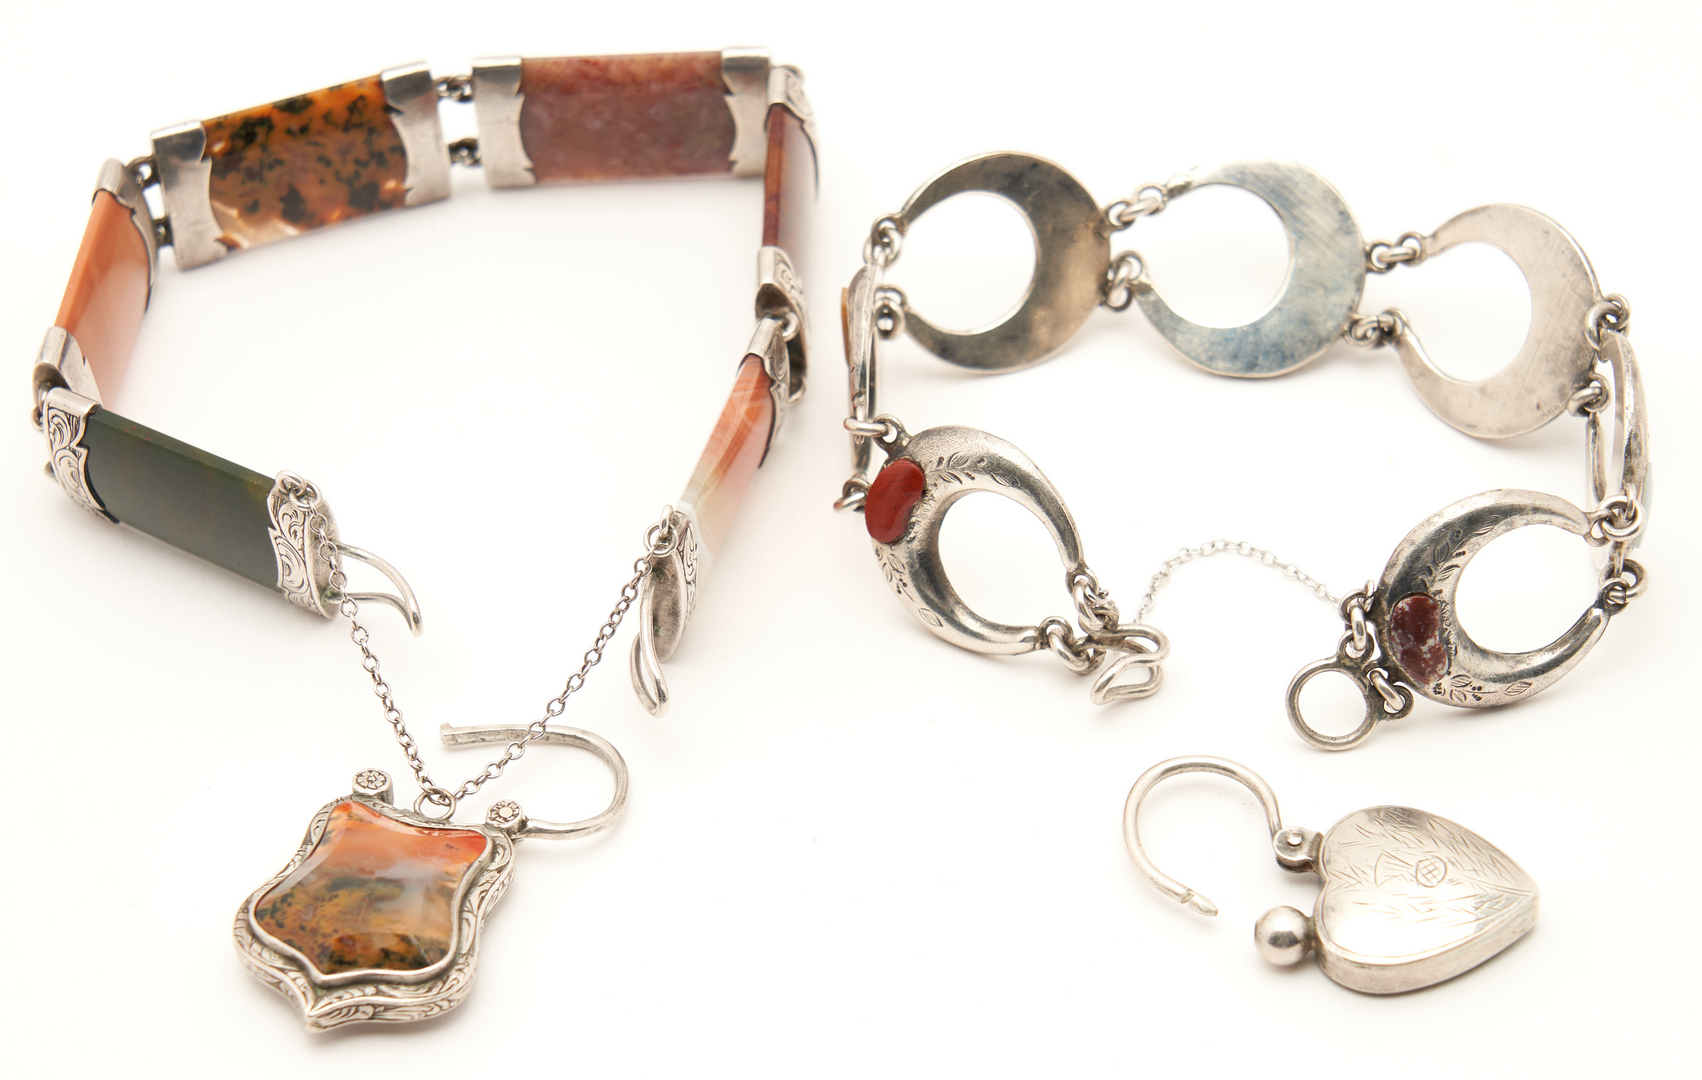 Lot 821: Group of Scottish-style Agate Jewelry, 14 items